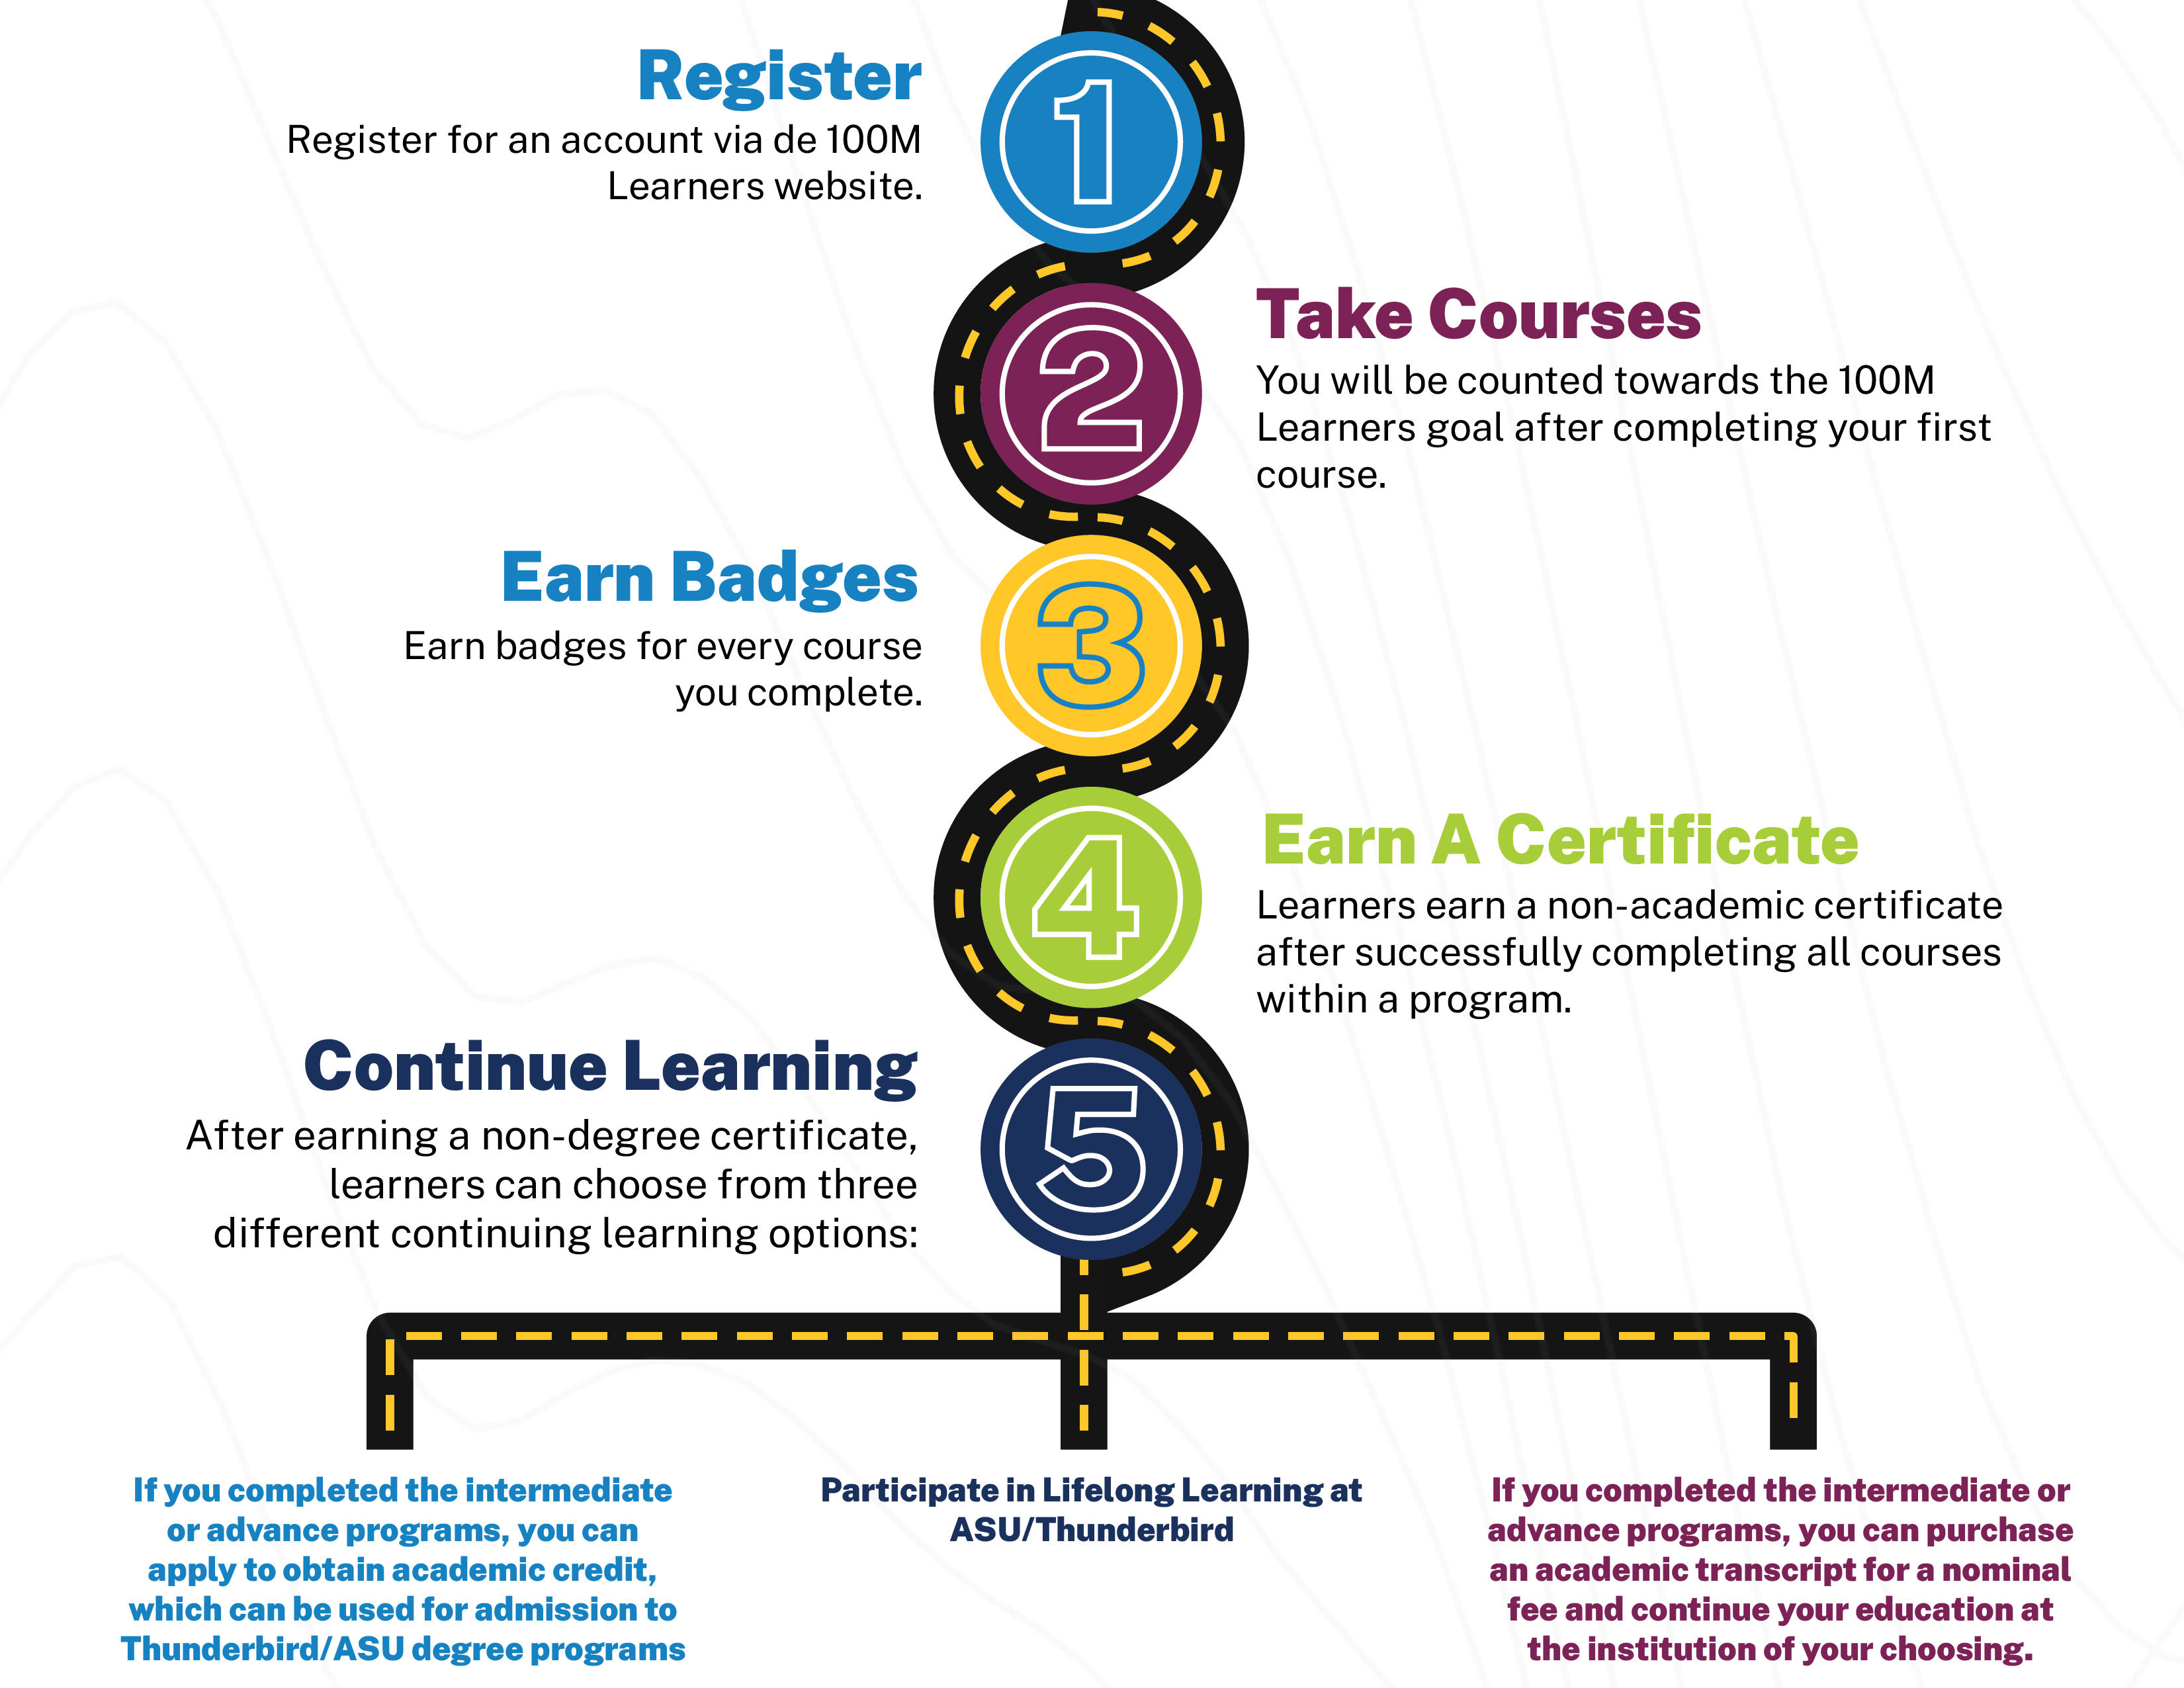 A graphic explaining the learner journey options for 100 Million Learners